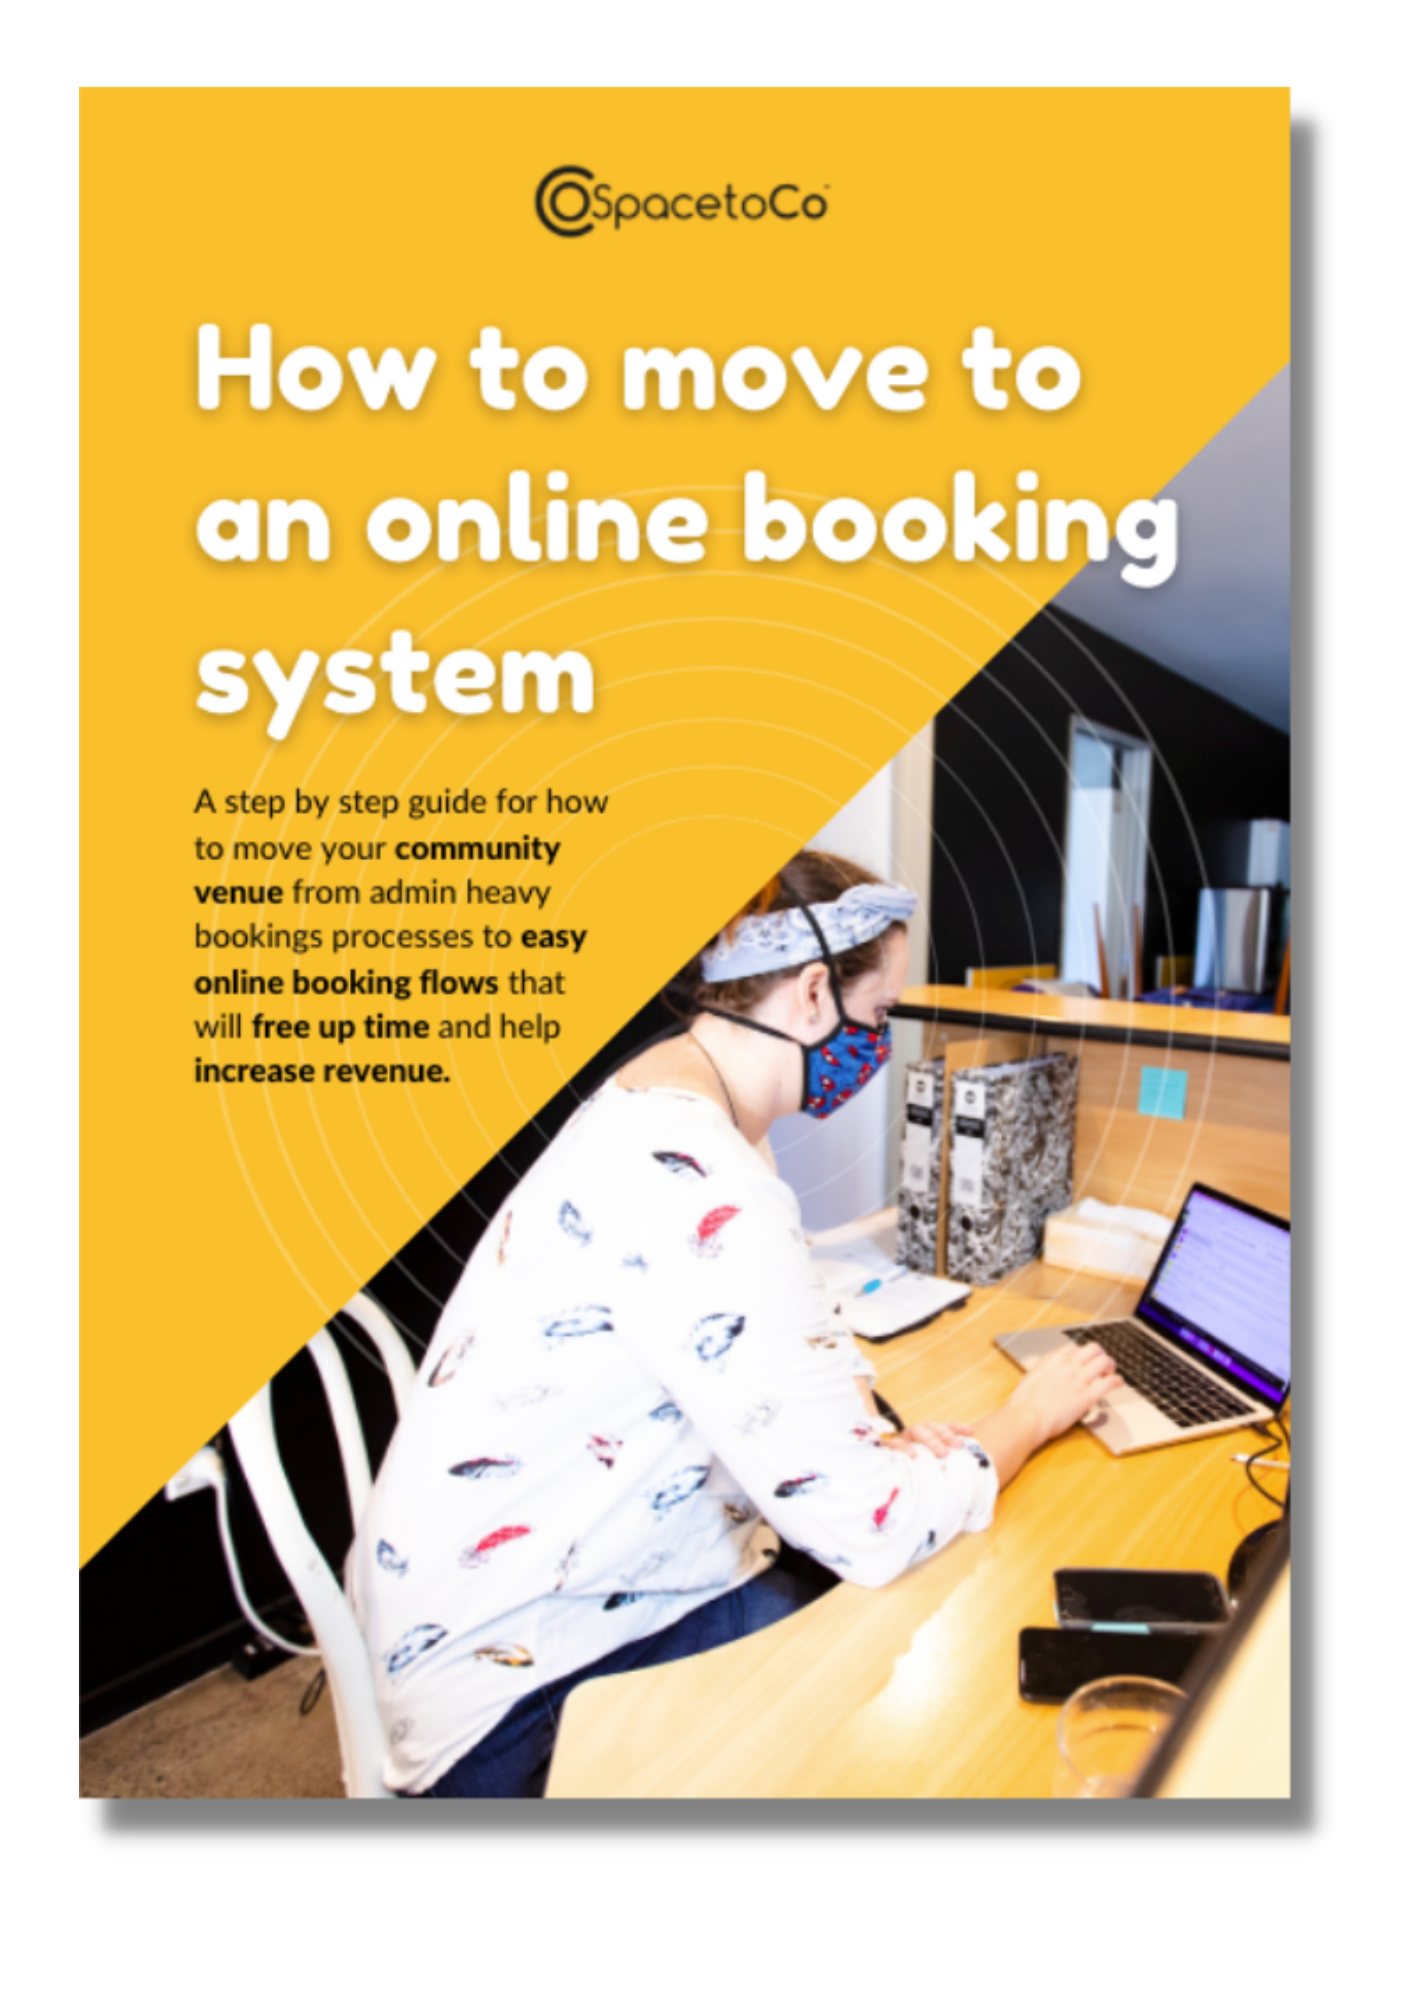 How to move to an online booking system